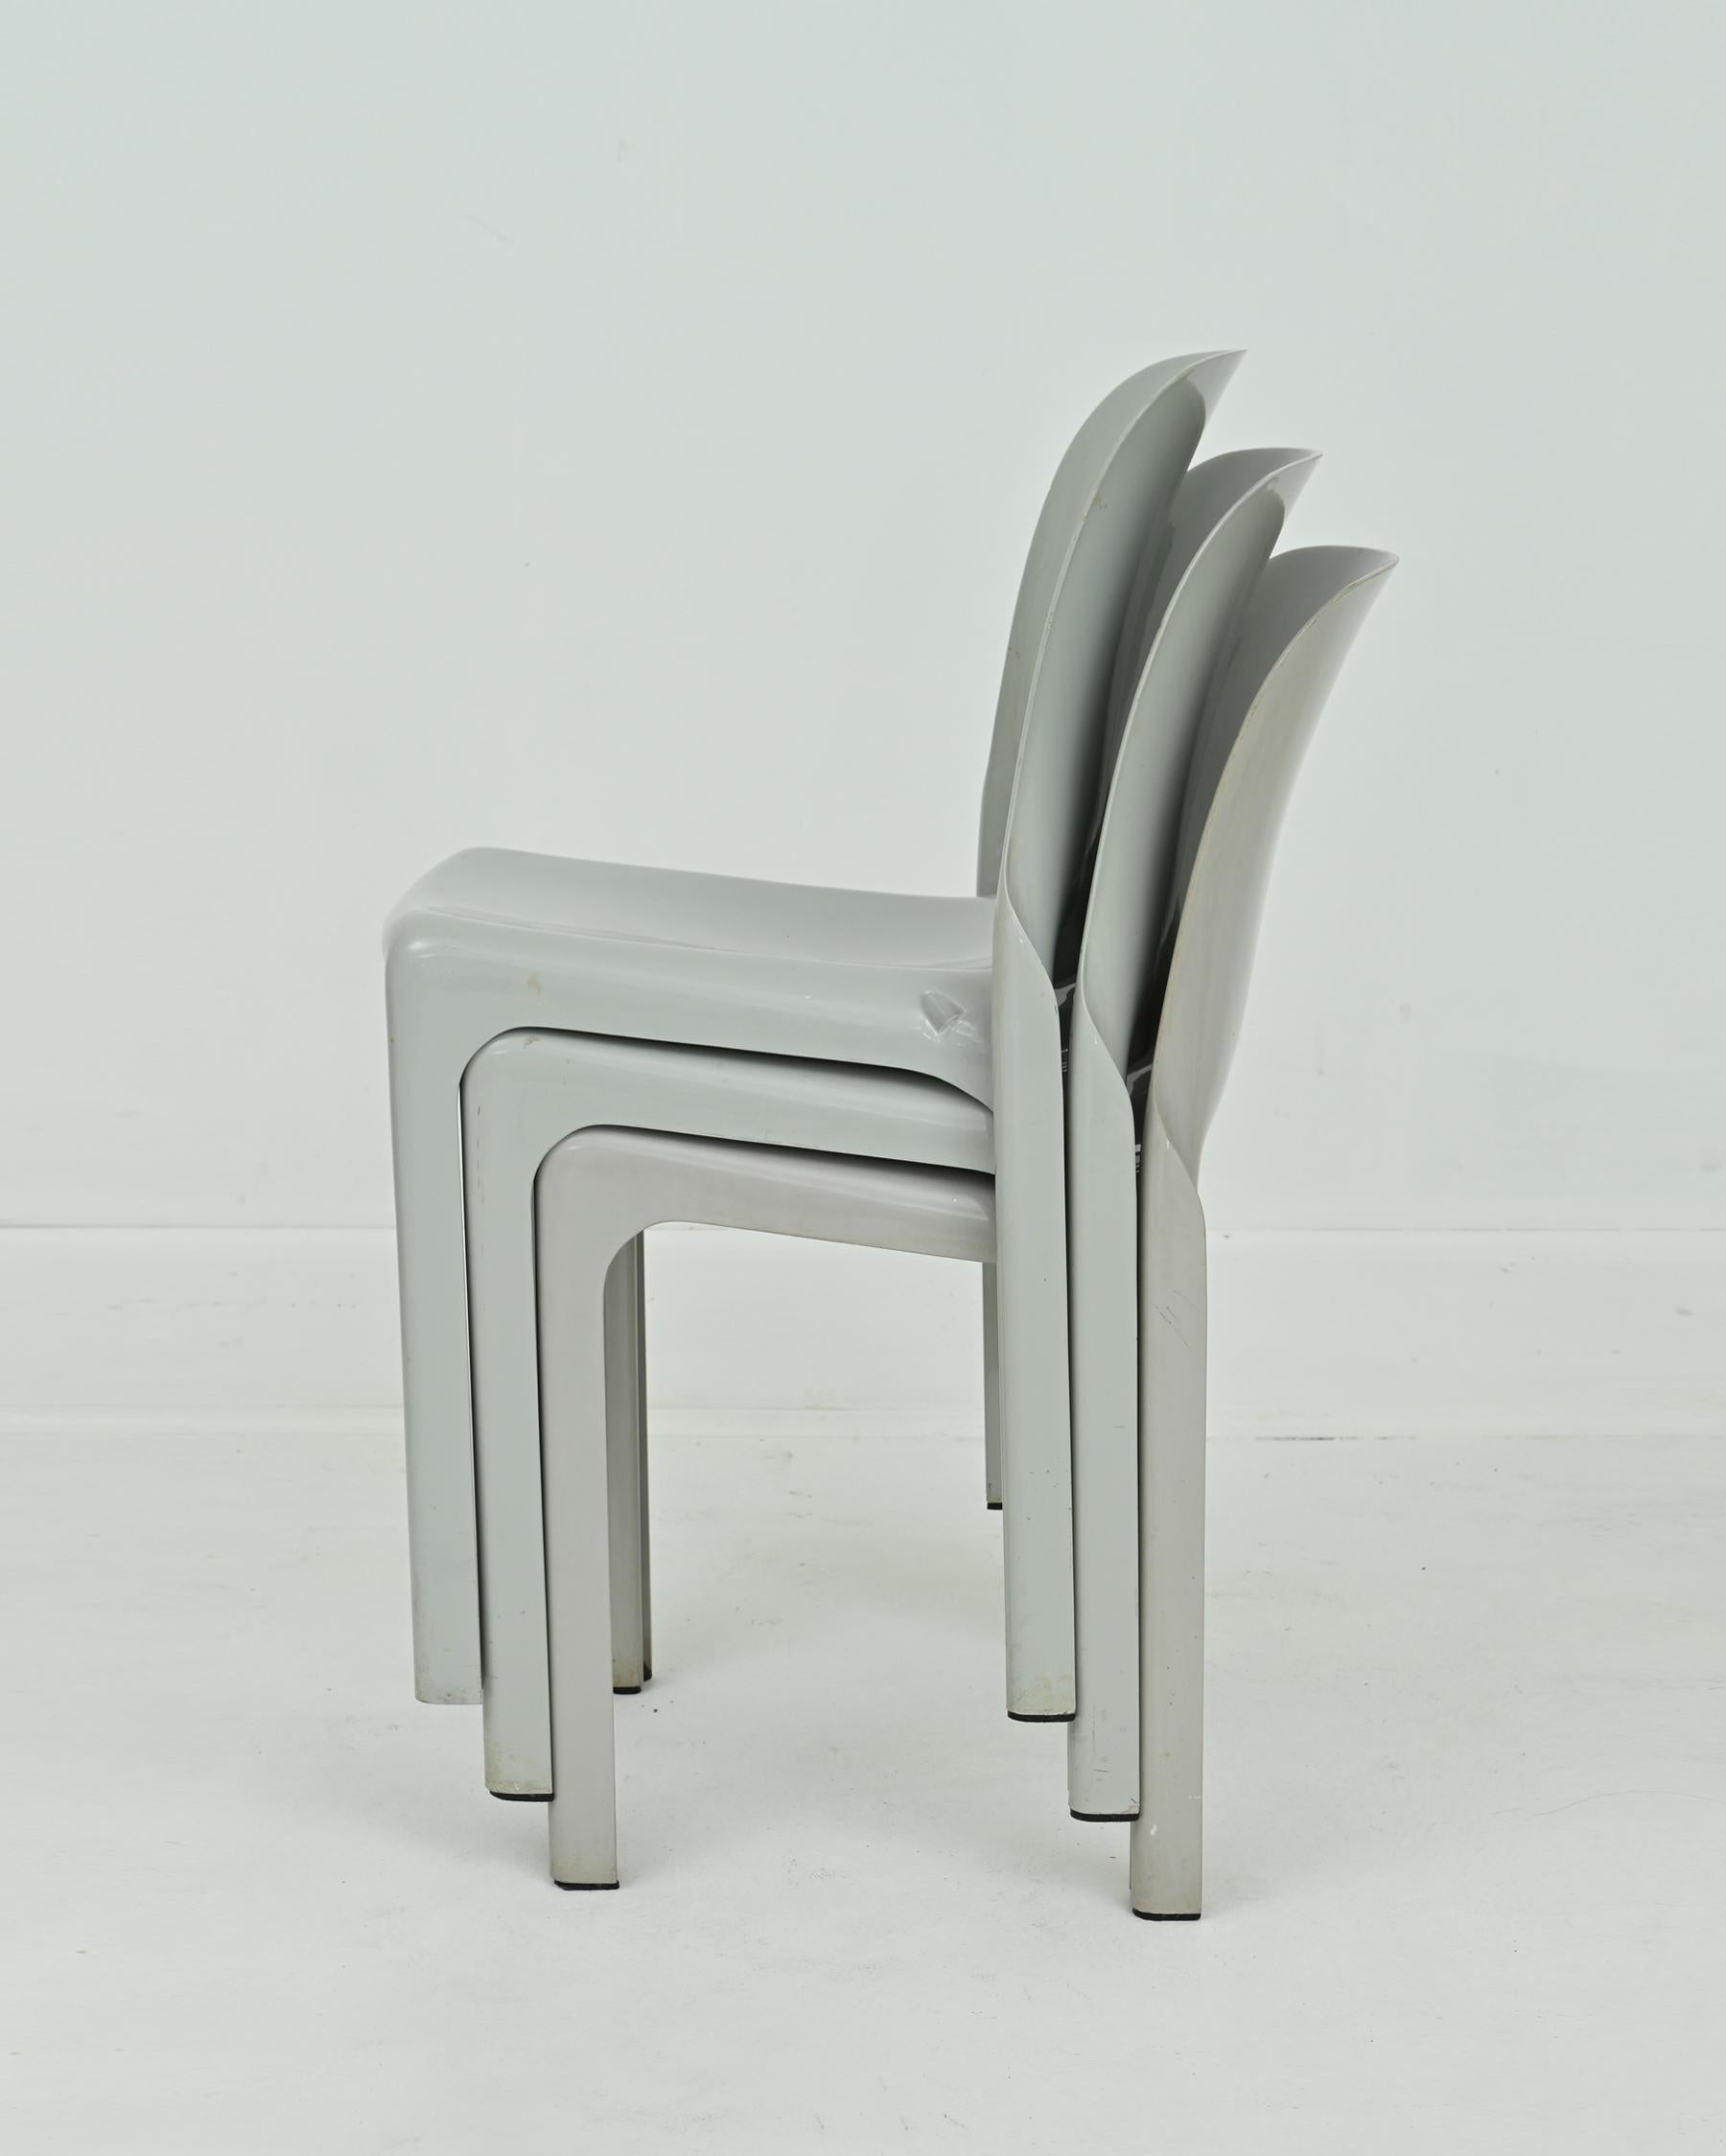 1960s grey Selene chair by Vico Magistretti for Artemide. These chairs were molded out of grey fiberglass-reinforced plastic as single pieces. Stackable and suitable for both indoor and outdoor use. Very good condition with some wear from age. Part